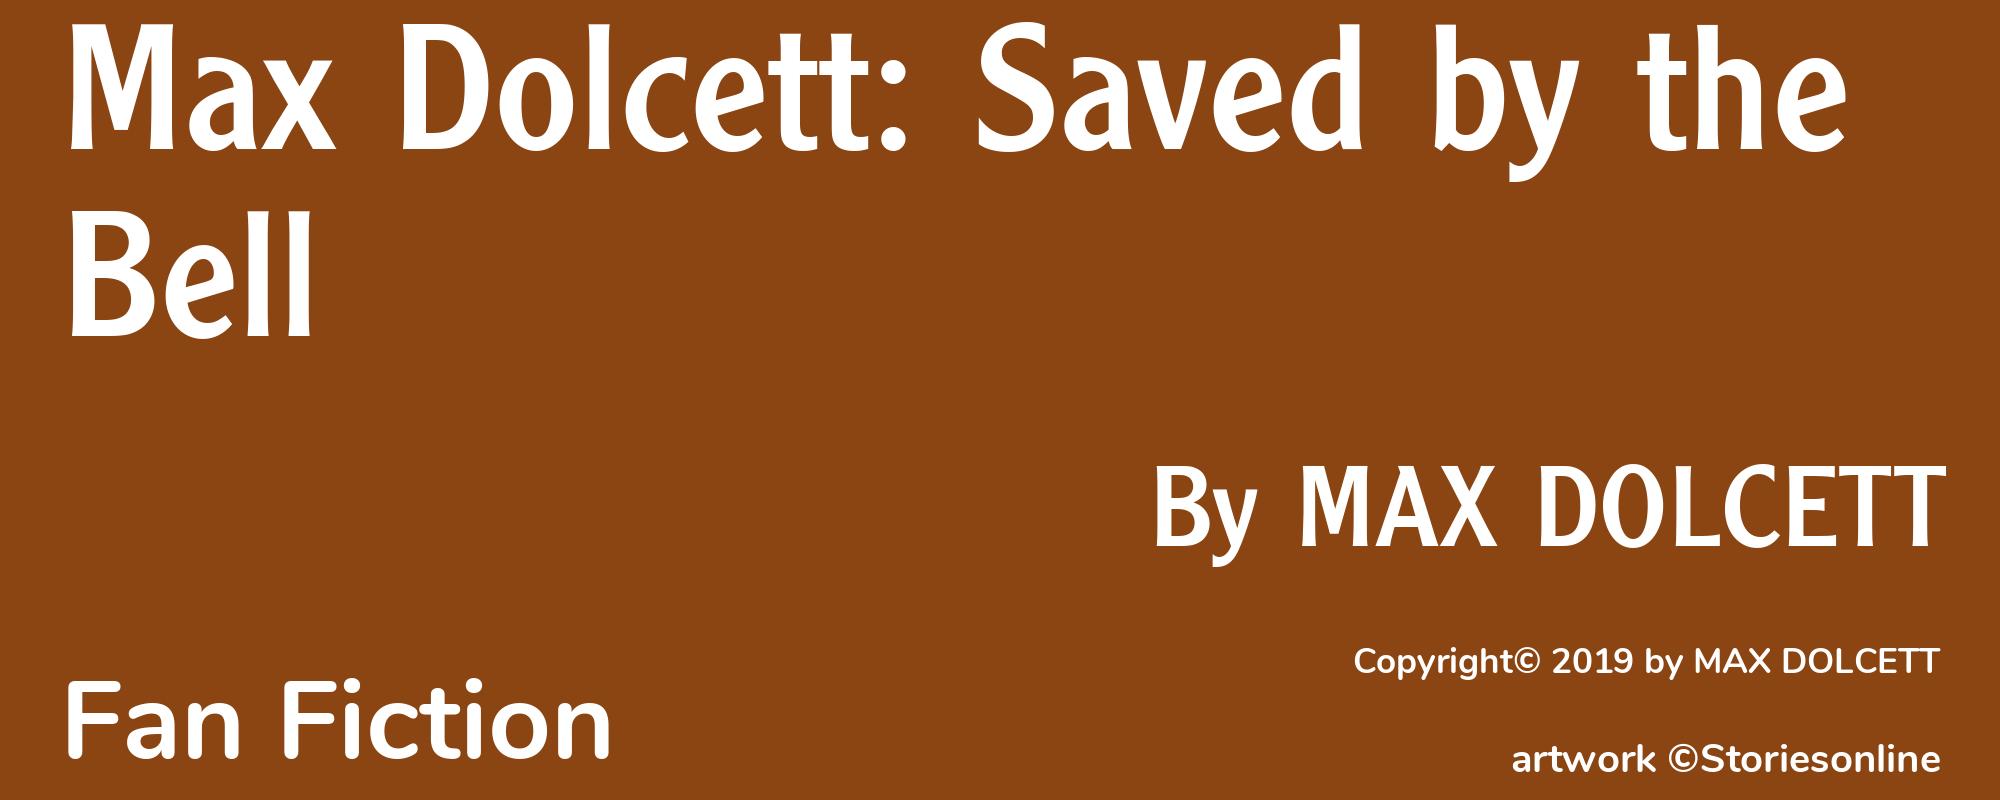 Max Dolcett: Saved by the Bell - Cover